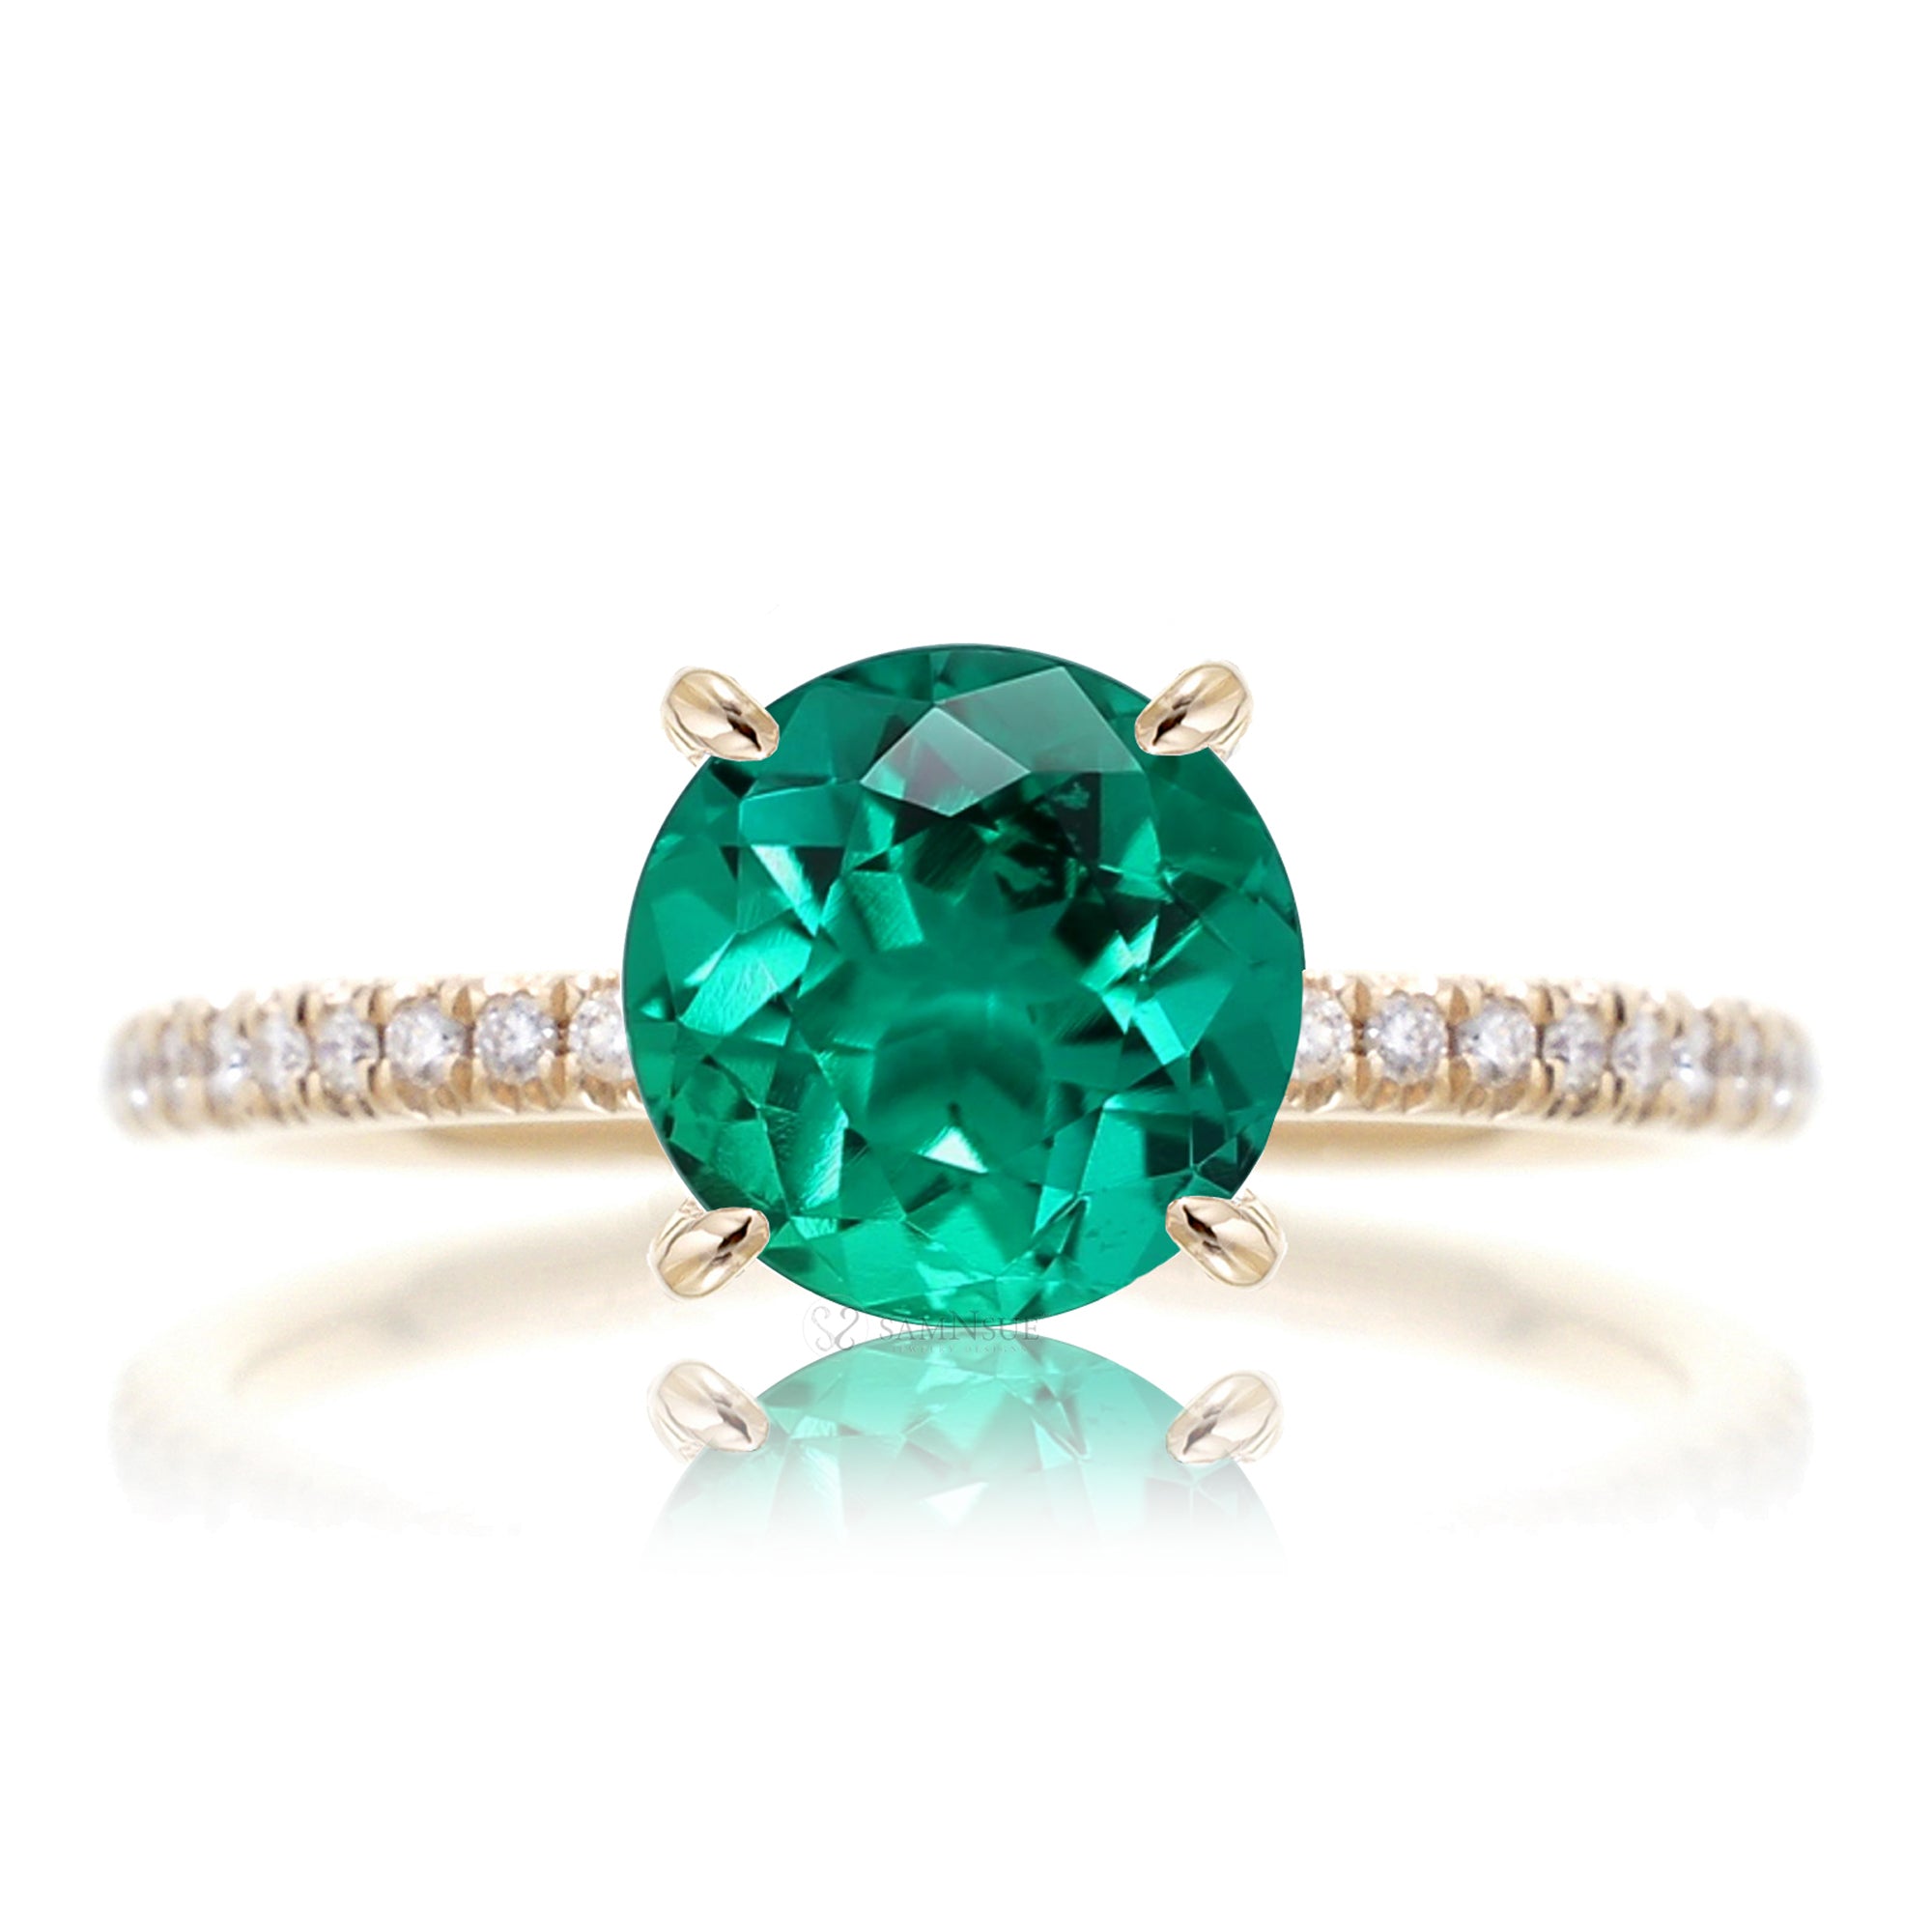 Round green emerald diamond band engagement ring yellow gold - the Ava